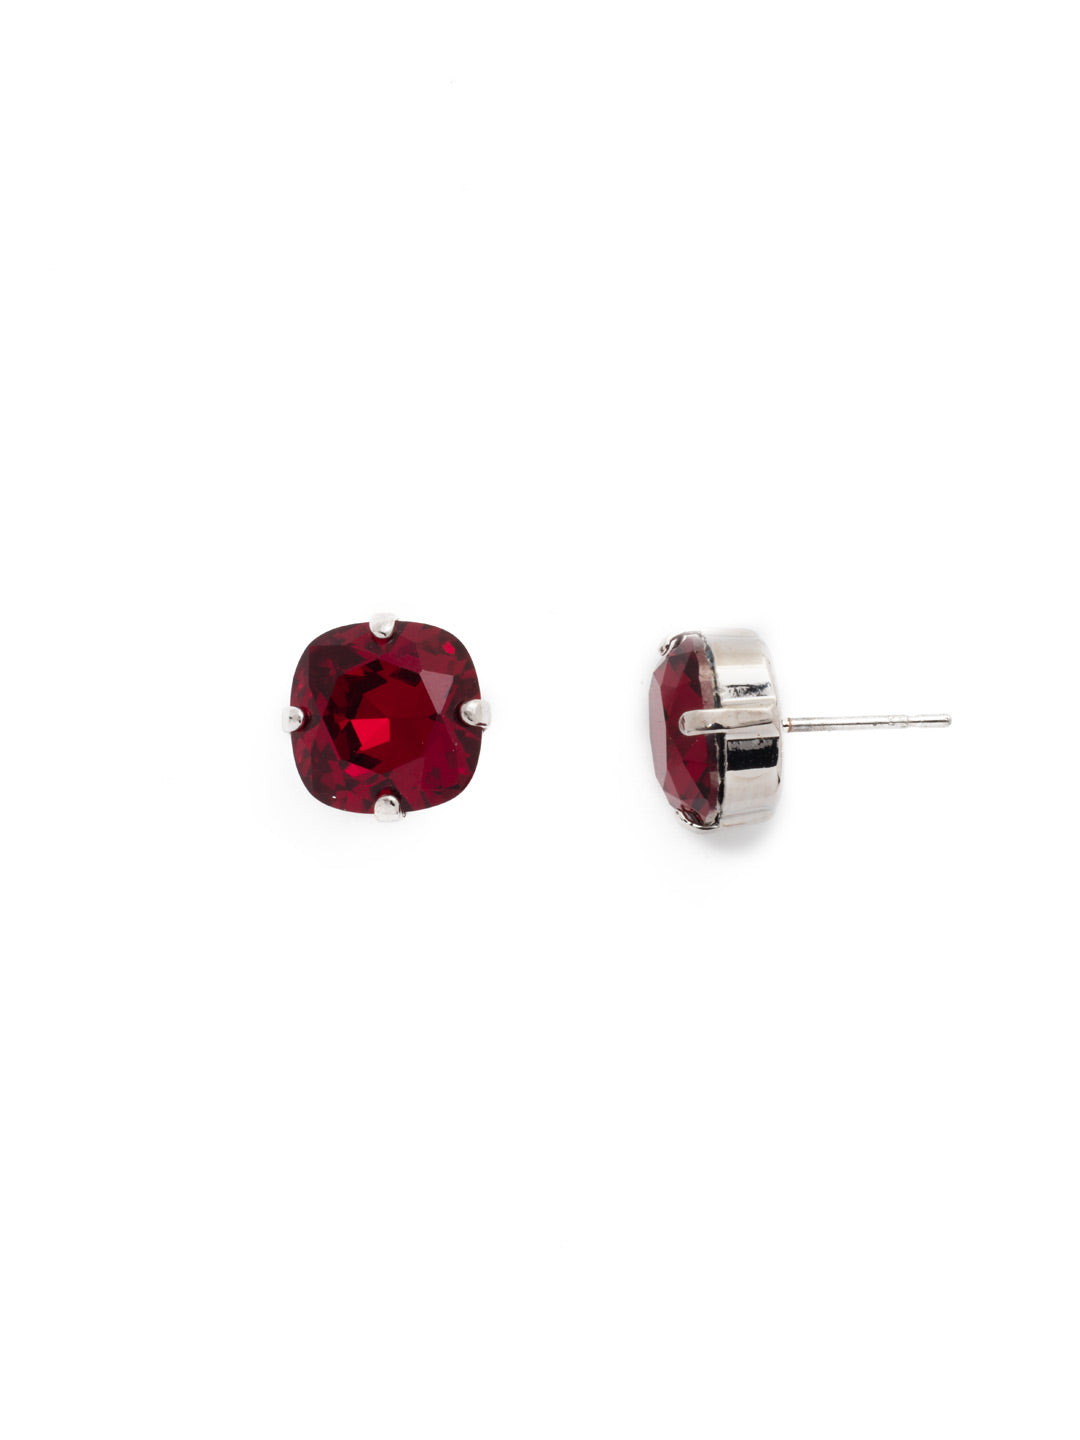 Halcyon Stud Earrings - EDH25RHSI - <p>A beautiful, luminous cushion-cut crystal in a classic four-pronged setting that's ideal for everyday wear. From Sorrelli's Siam collection in our Palladium Silver-tone finish.</p>